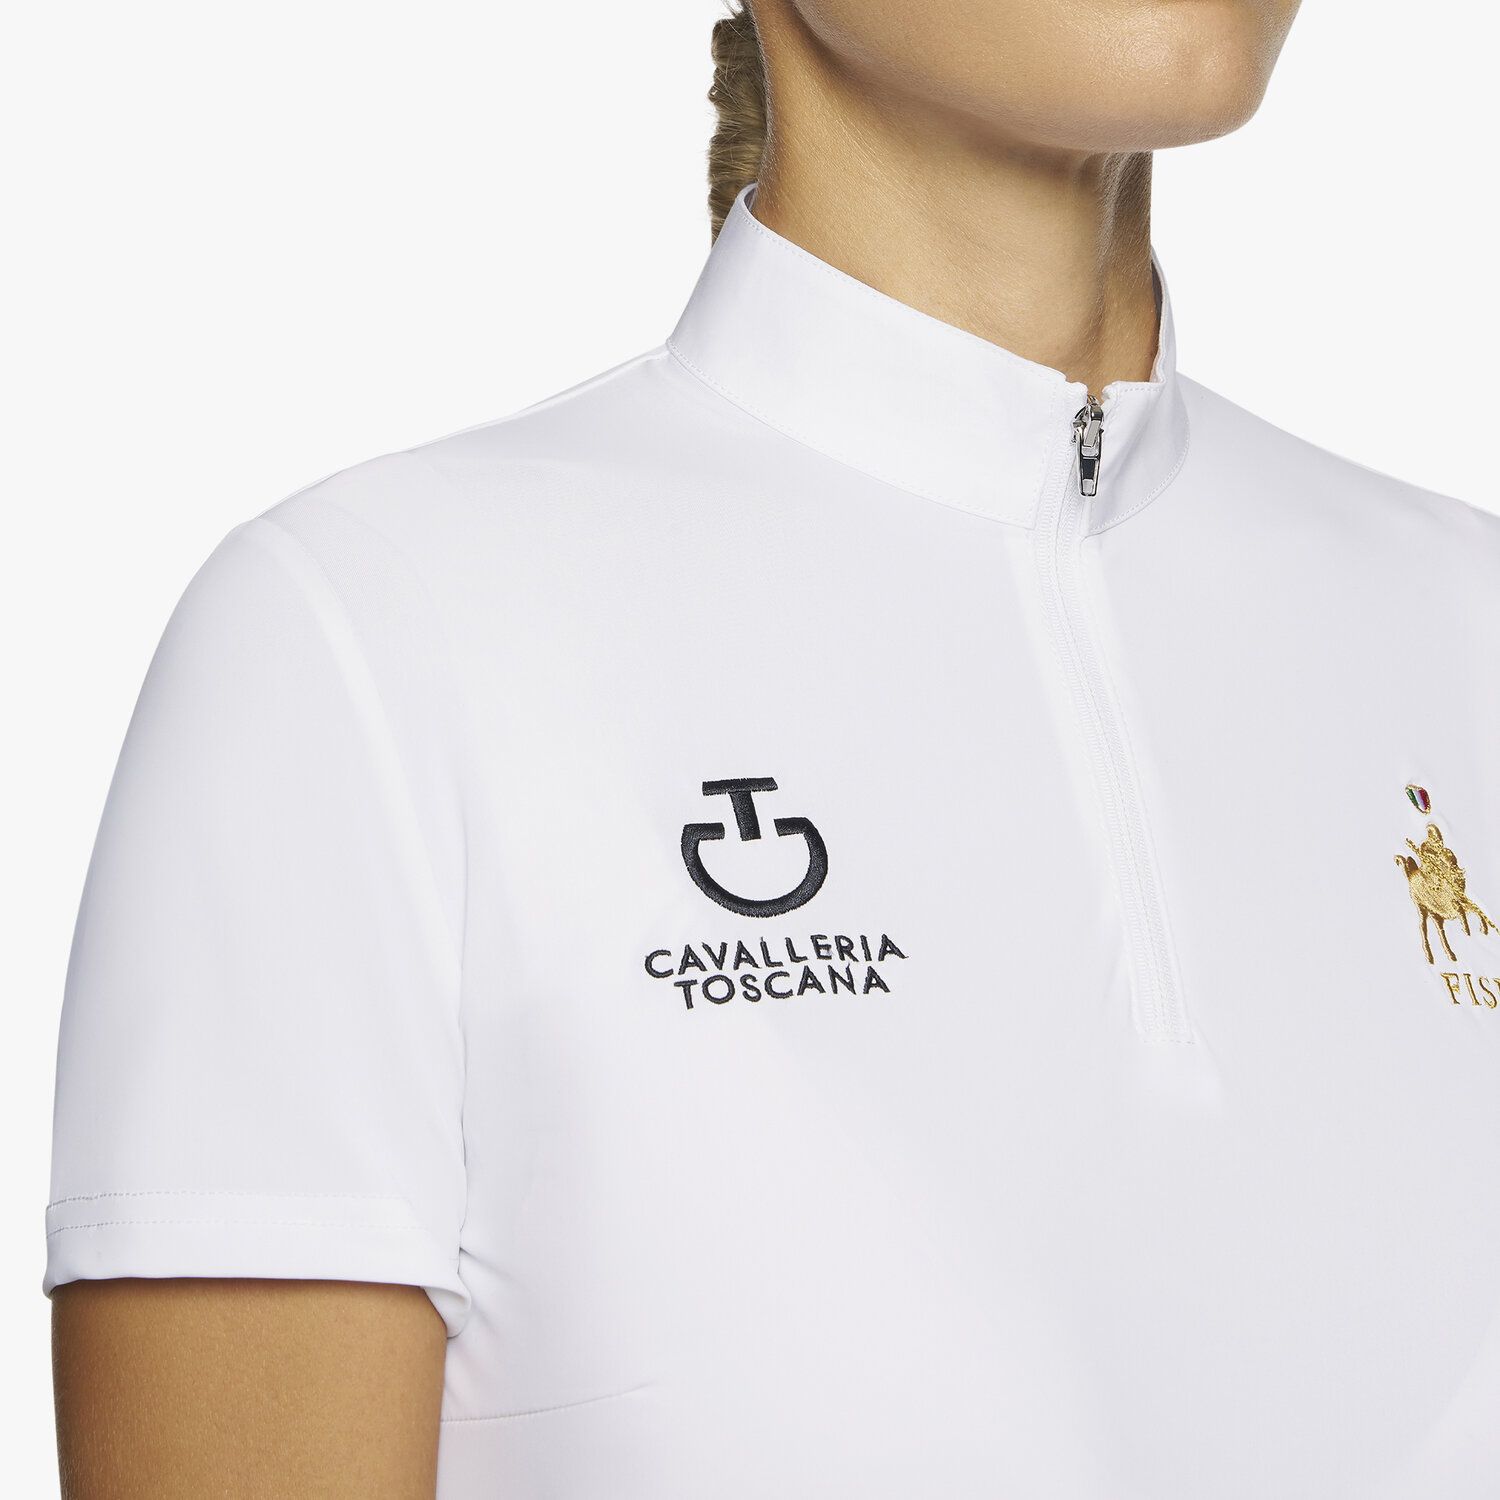 Cavalleria Toscana Woman's FISE short sleeved competition Polo WHITE-5